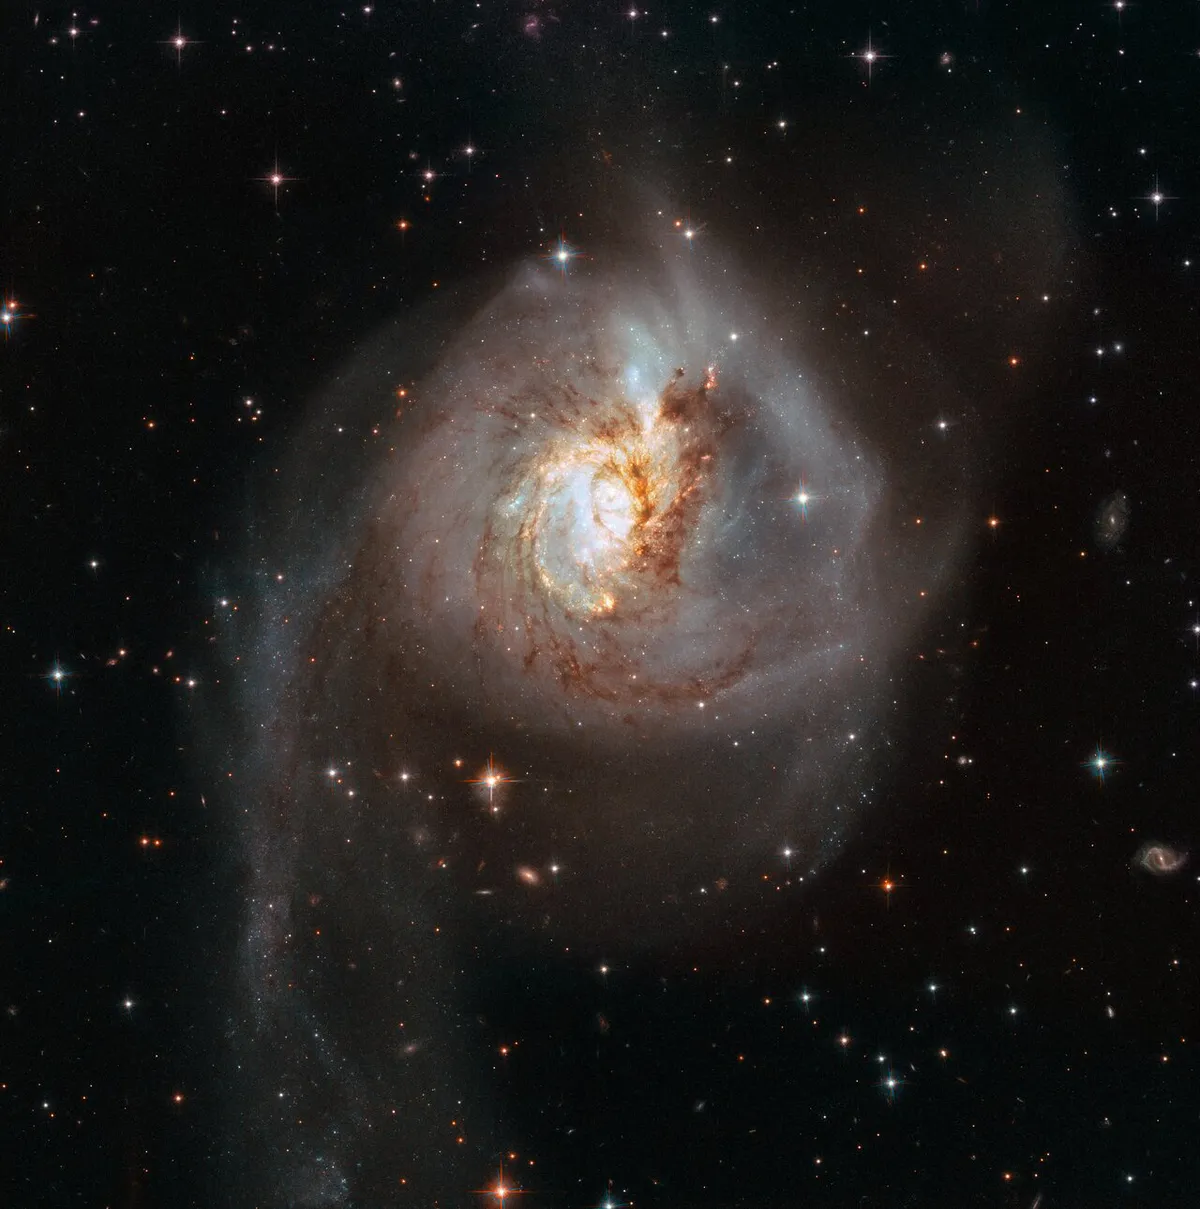 Galaxy NGC 3256, about 100 million lightyears away, formed as a result of a merger of two galaxies. The issue surrounding the central black holes in merging galaxies is known as the Final Parsec Problem. Credit: ESA/Hubble, NASA